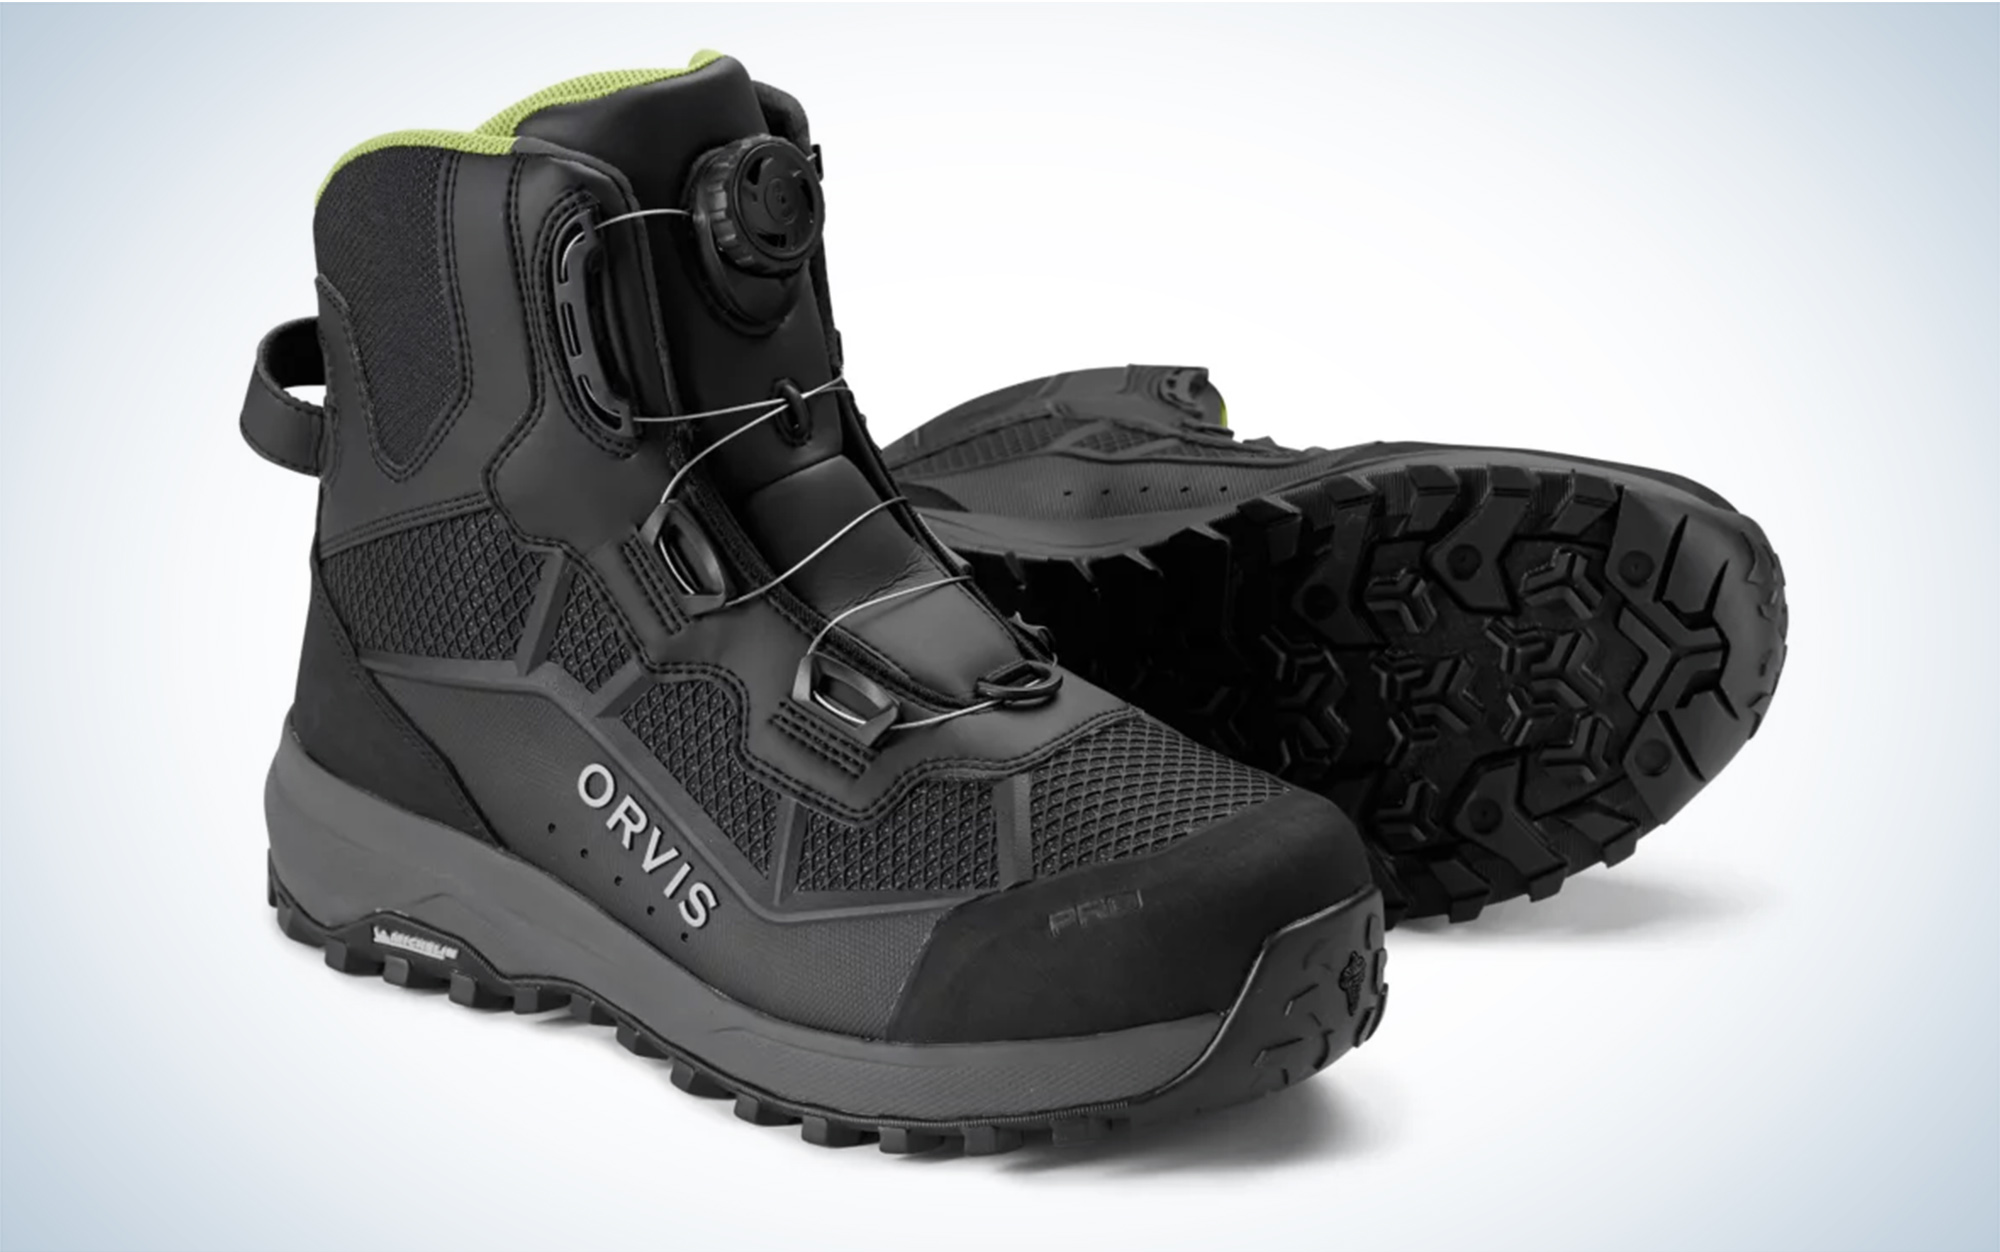 The Orvis PRO BOA Wading Boot is best overall.